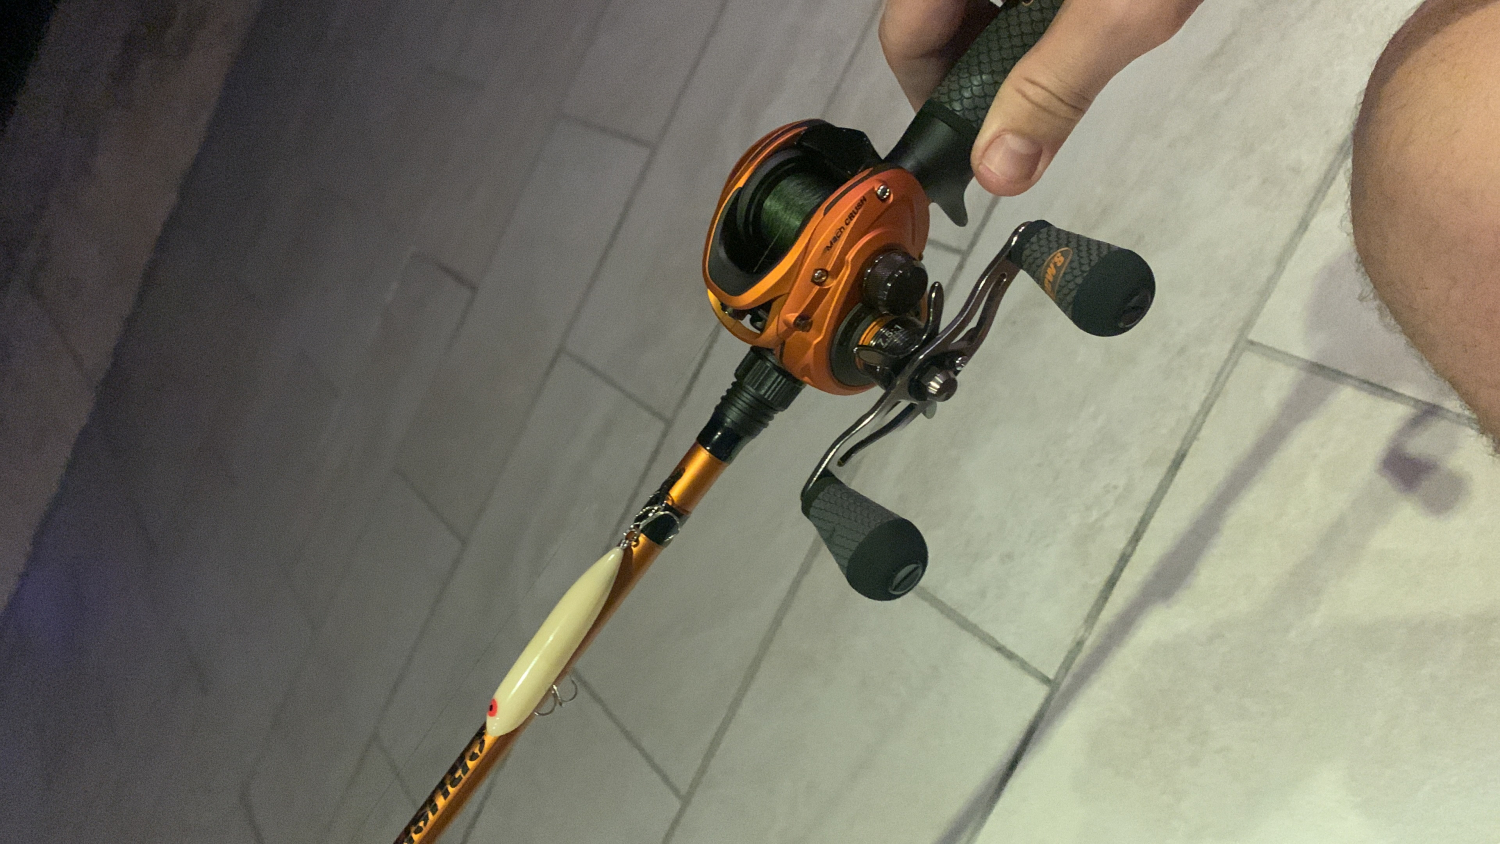 Lew's Mach Crush Baitcast Combo Rod and Reel MH/F | Gear Ratio 7.5:1 7'0''  (Right Hand)